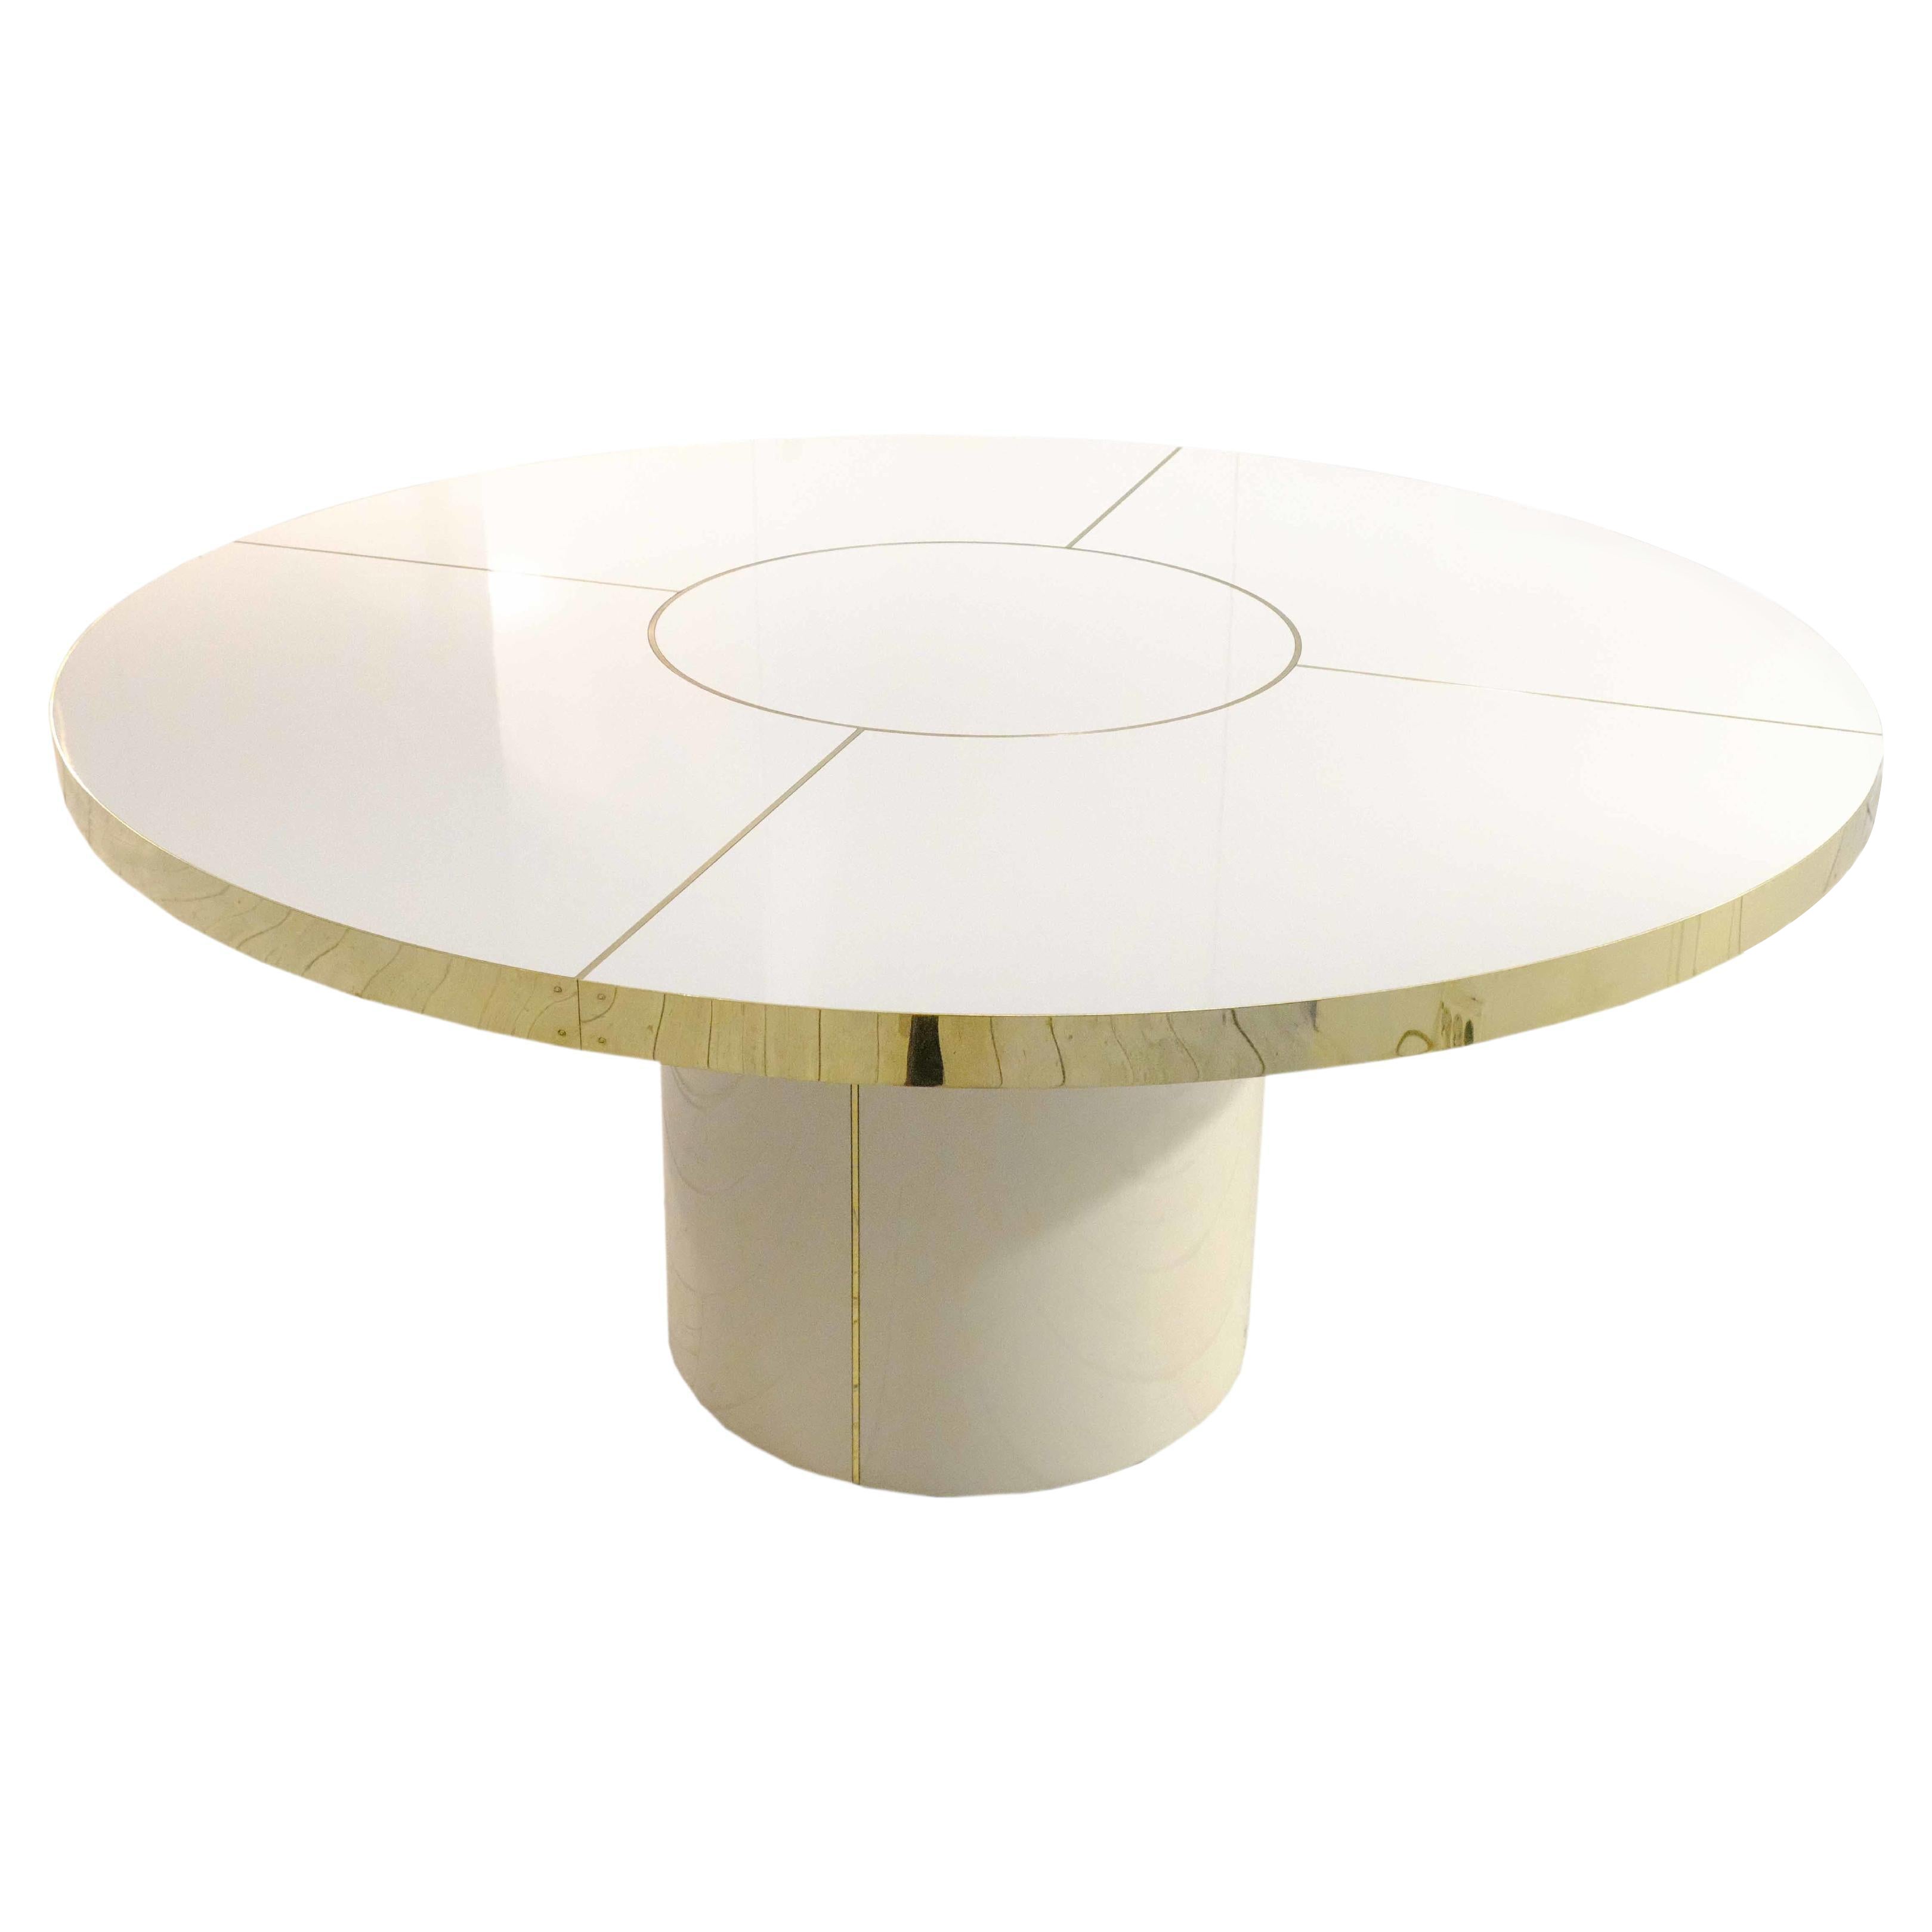 Retro Design Round Dining Table Palm Springs Style High Gloss Laminated & Brass Details and with contrasting Navy - Night Sea pedestal Leg -  XXL Size

Discover our incredible collection of retro-style design tables inspired by the iconic decoration